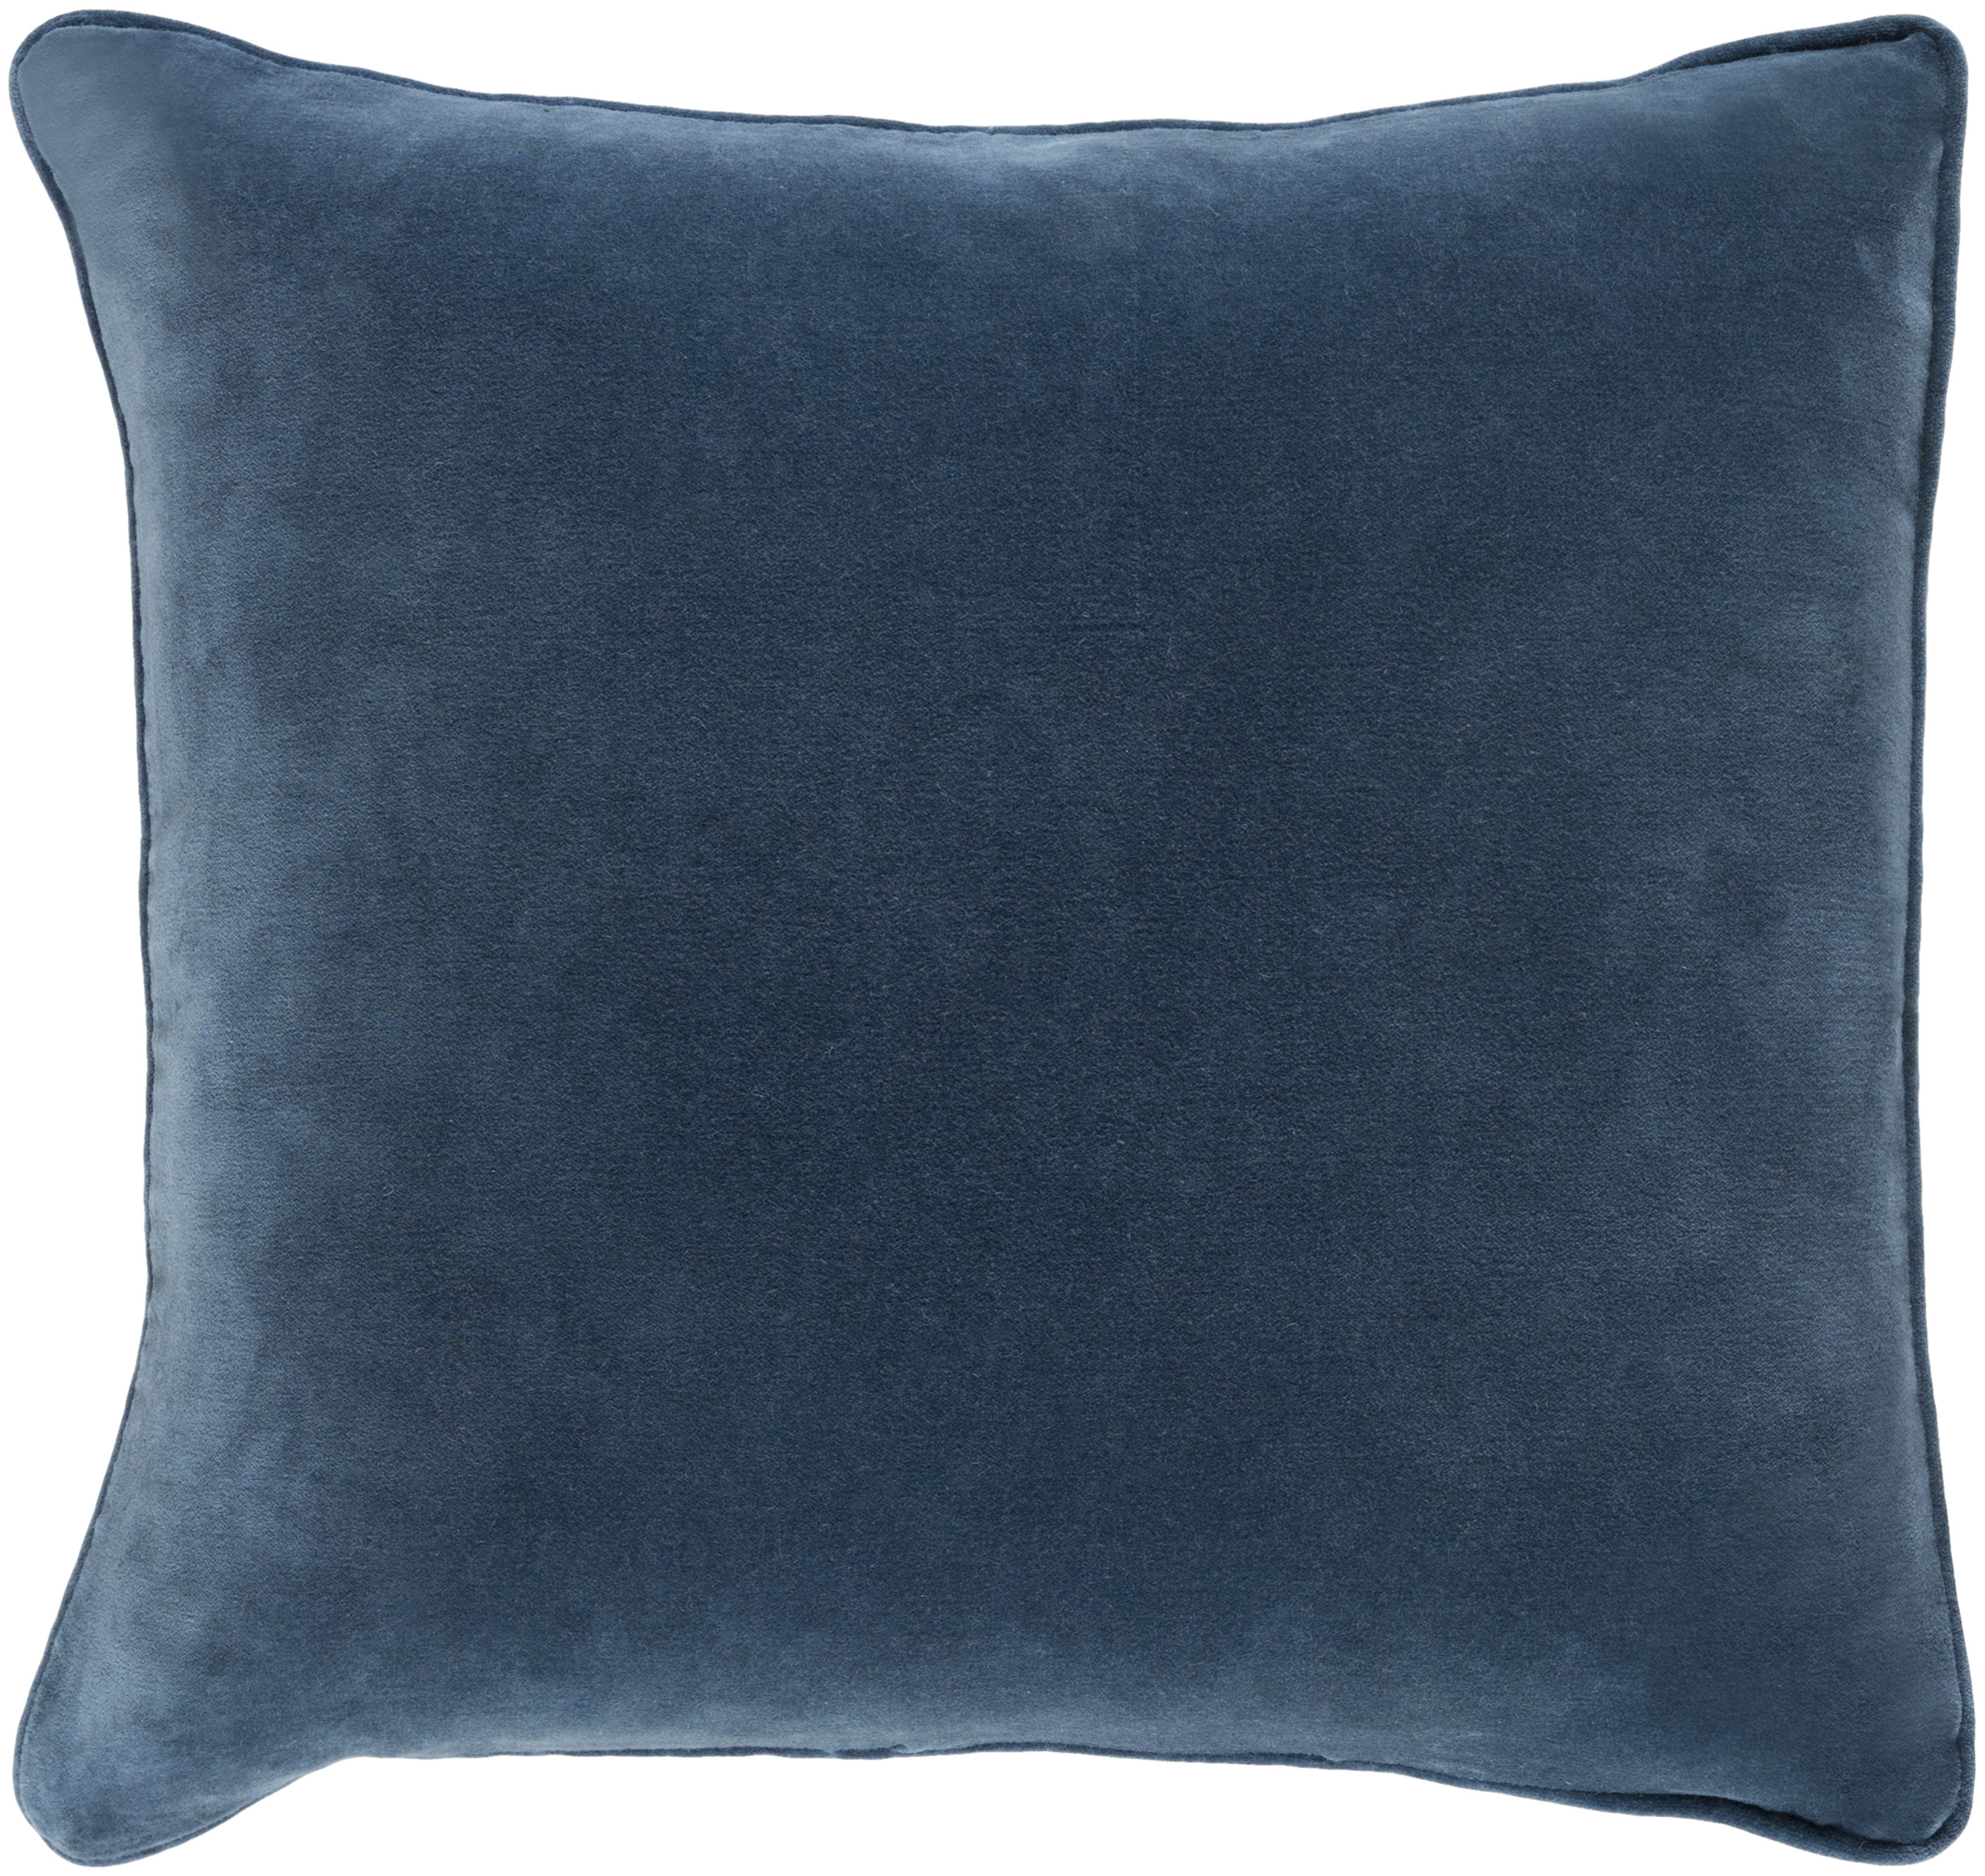 Safflower Throw Pillow, 22" x 22", with down insert - Image 0